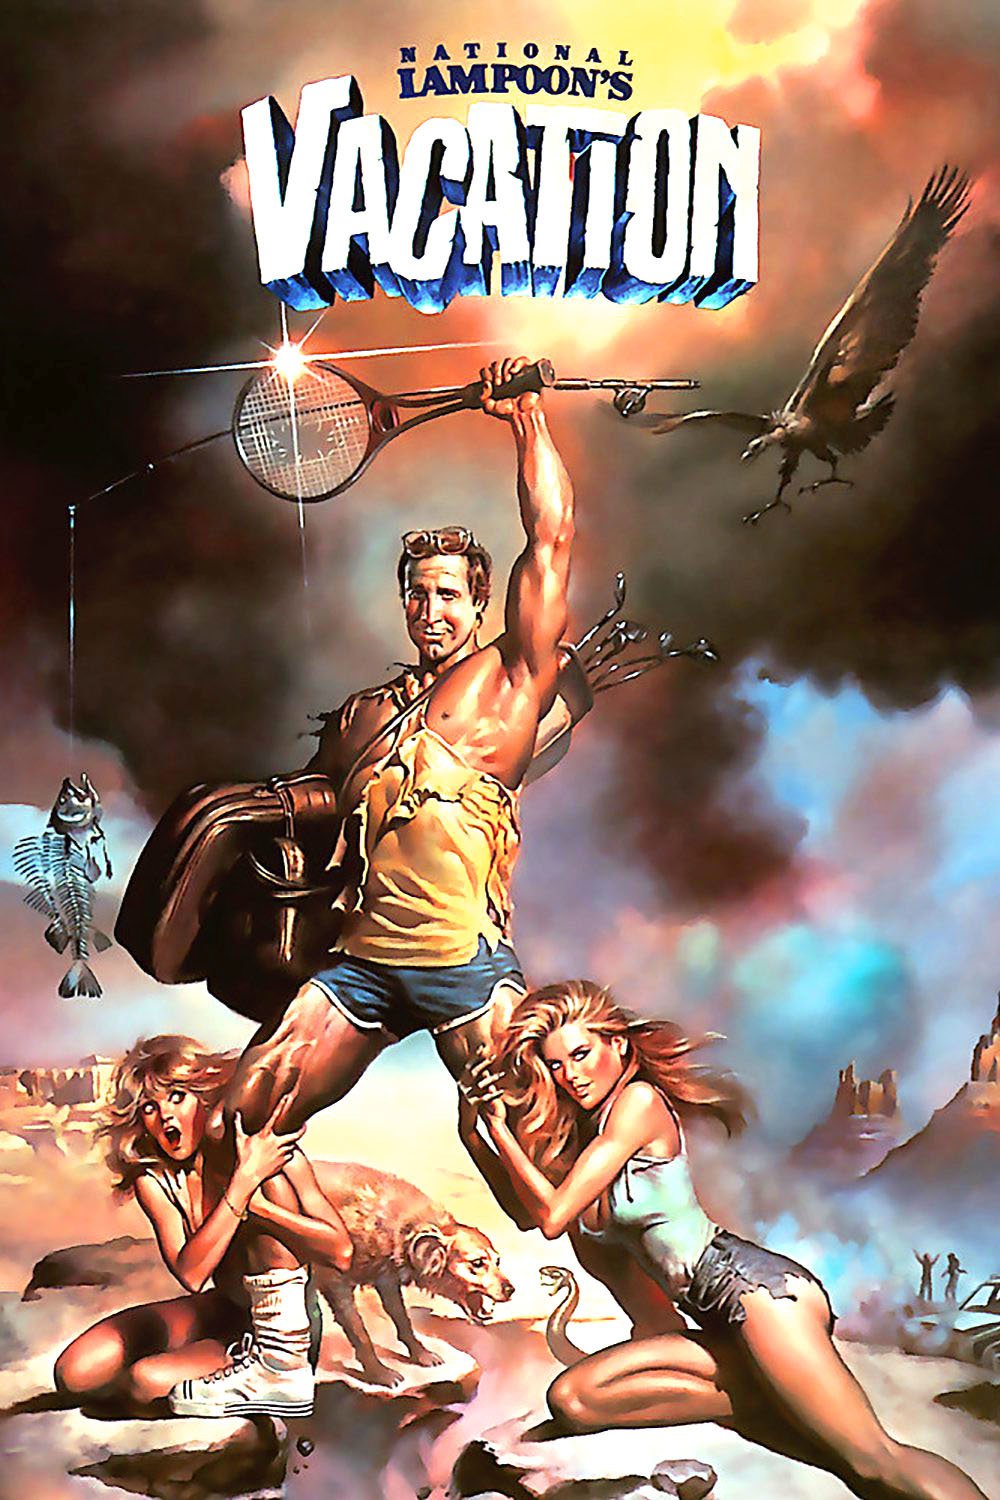 National lampoon’s vacation.